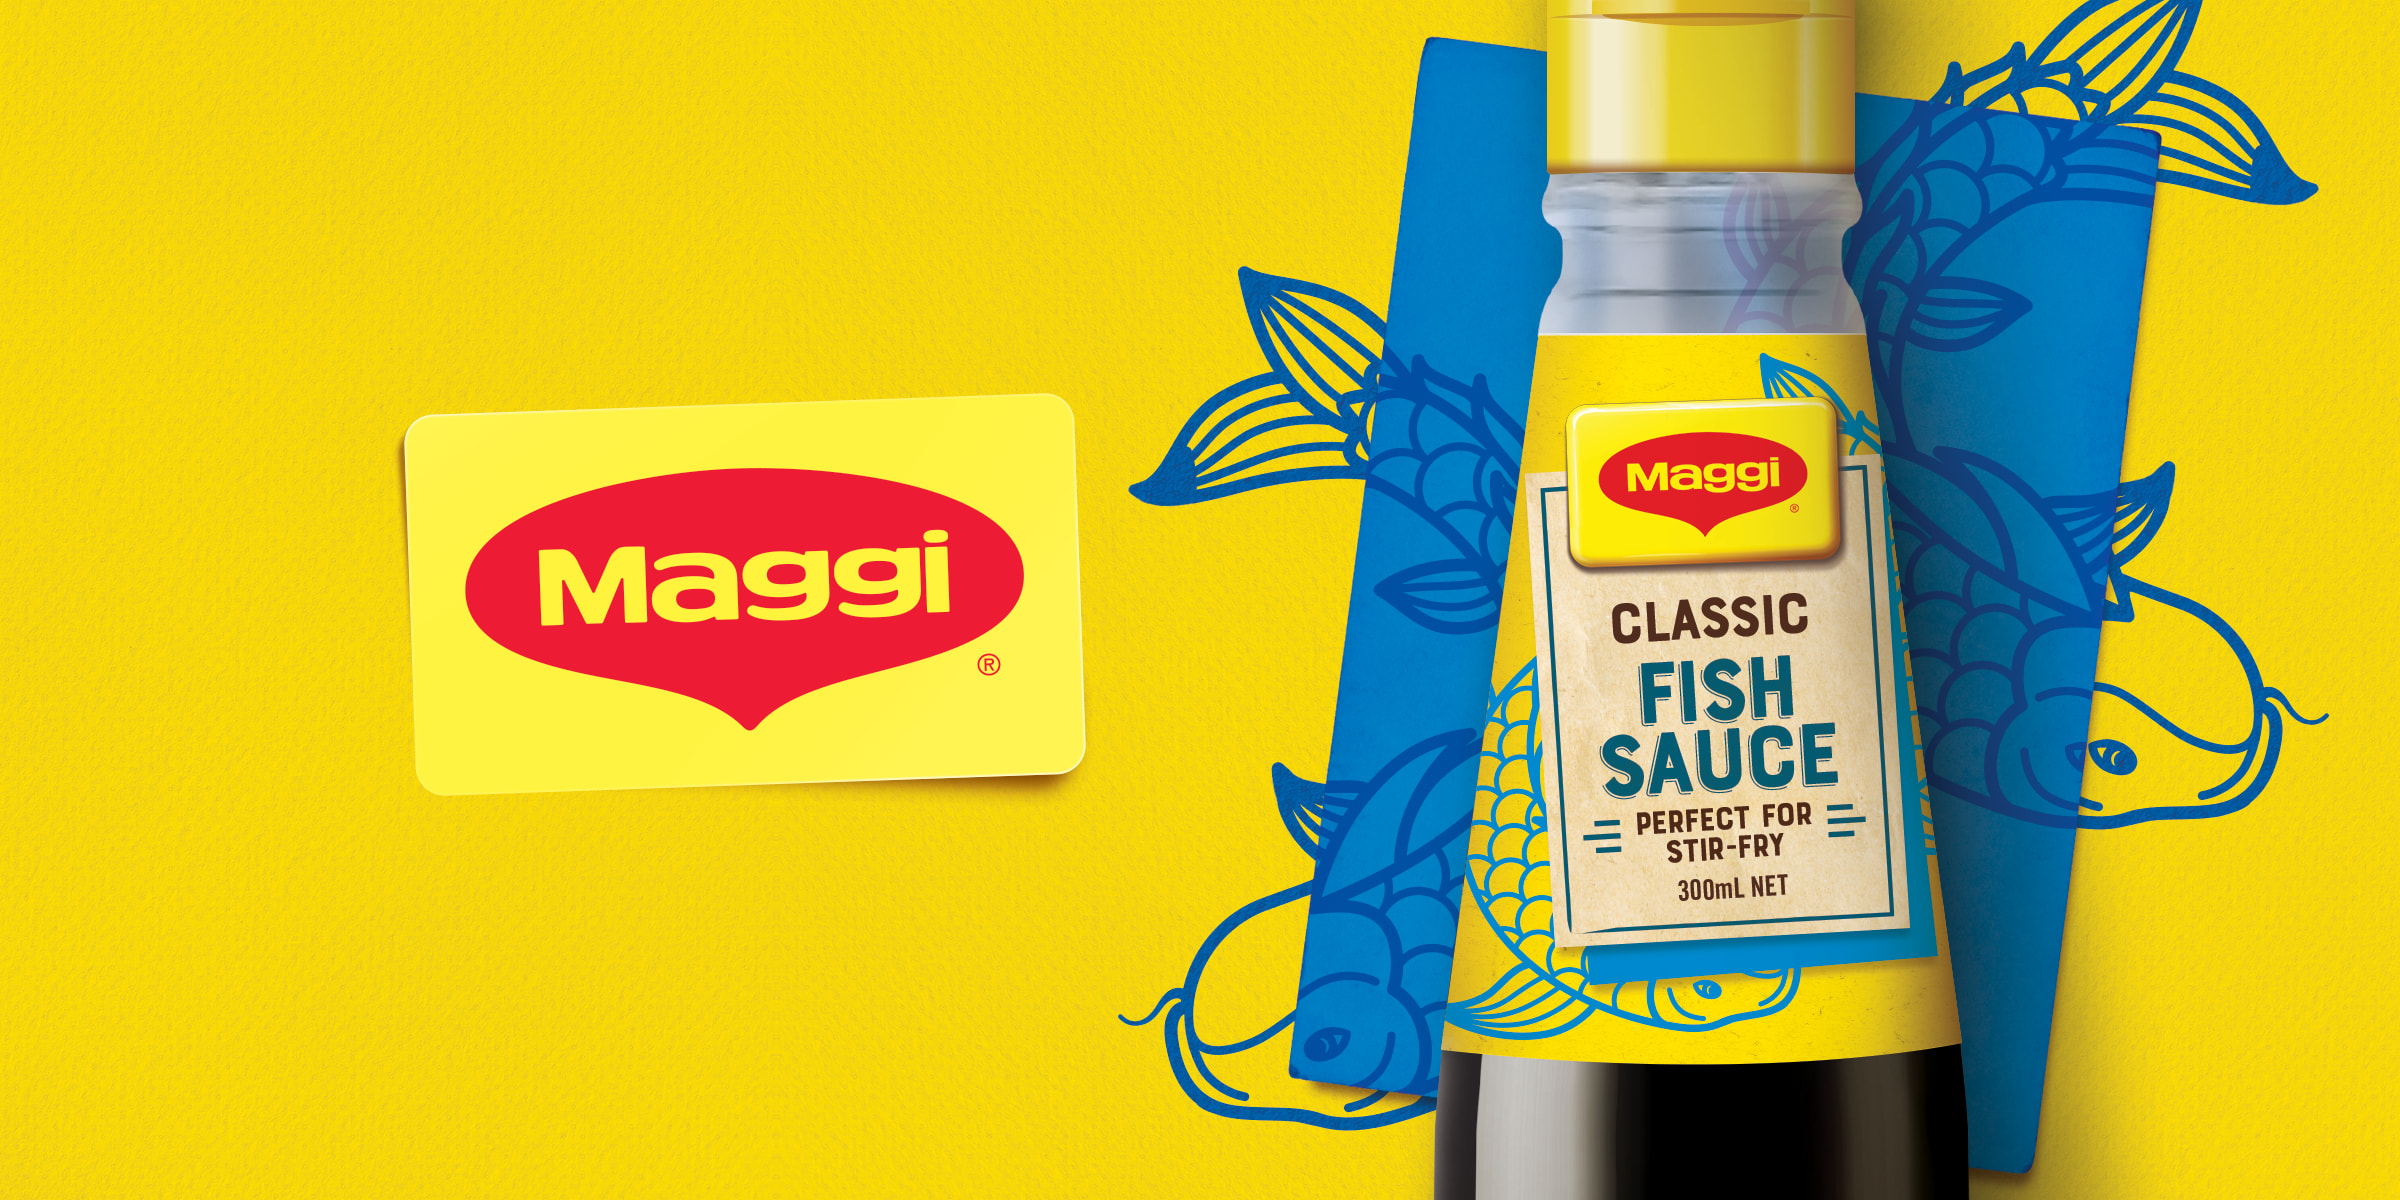 maggi-packaging-redesign-boxer-and-co-agency